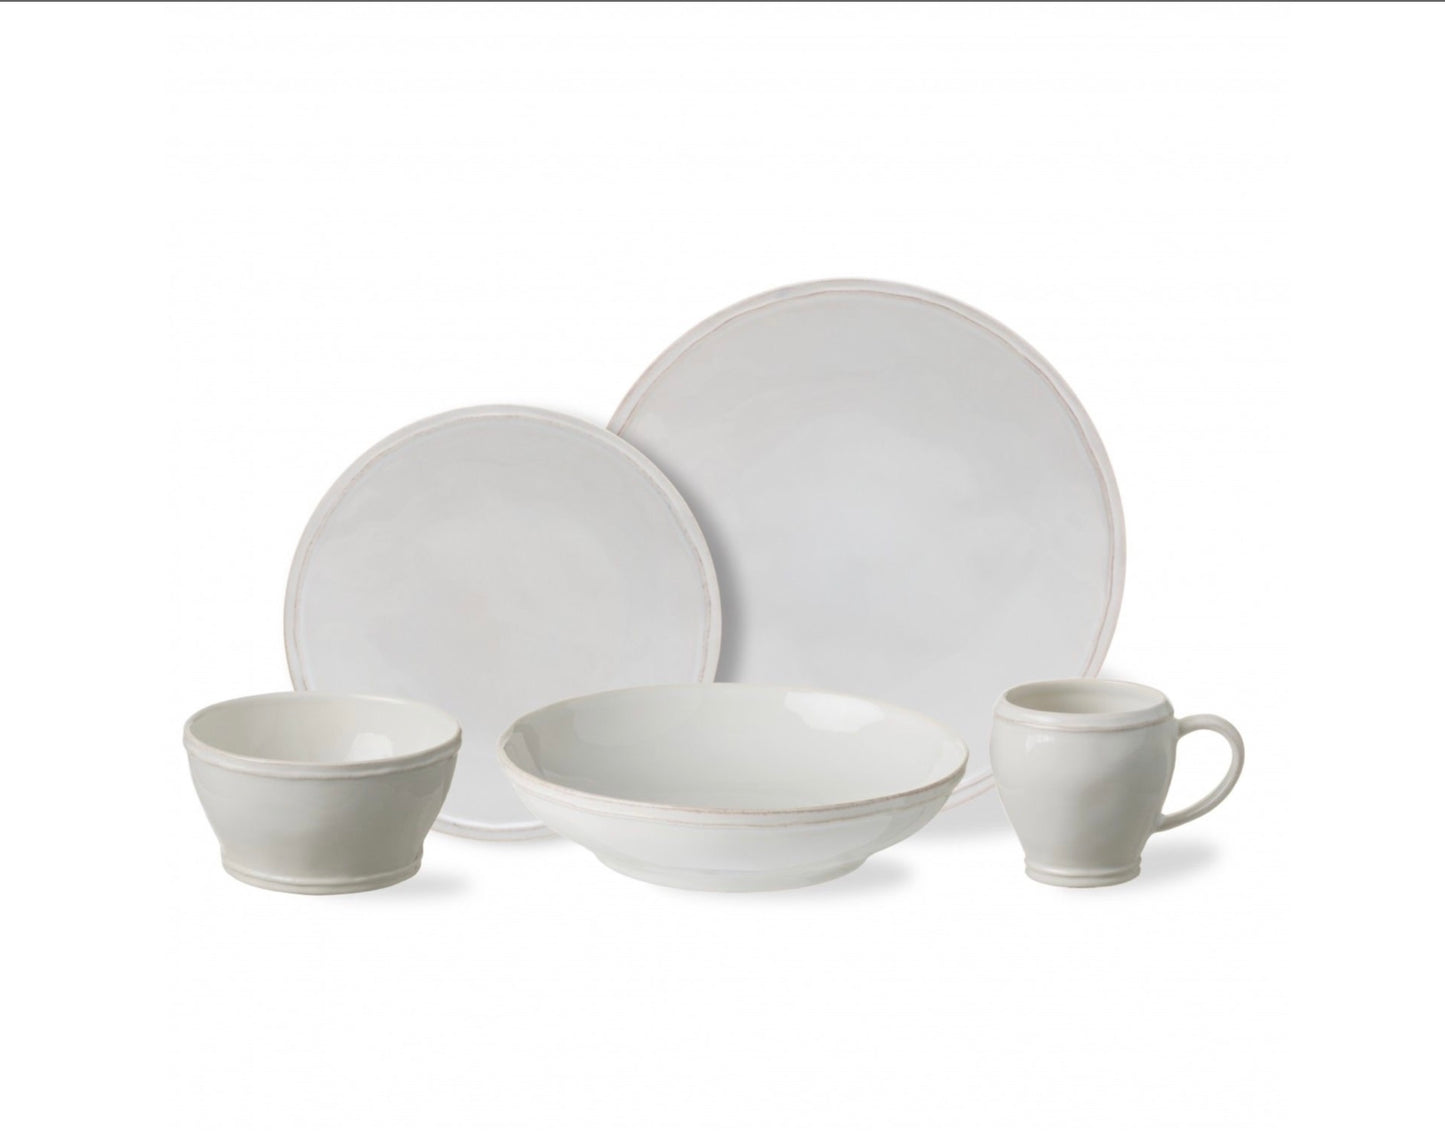 5 Piece Place Setting- White